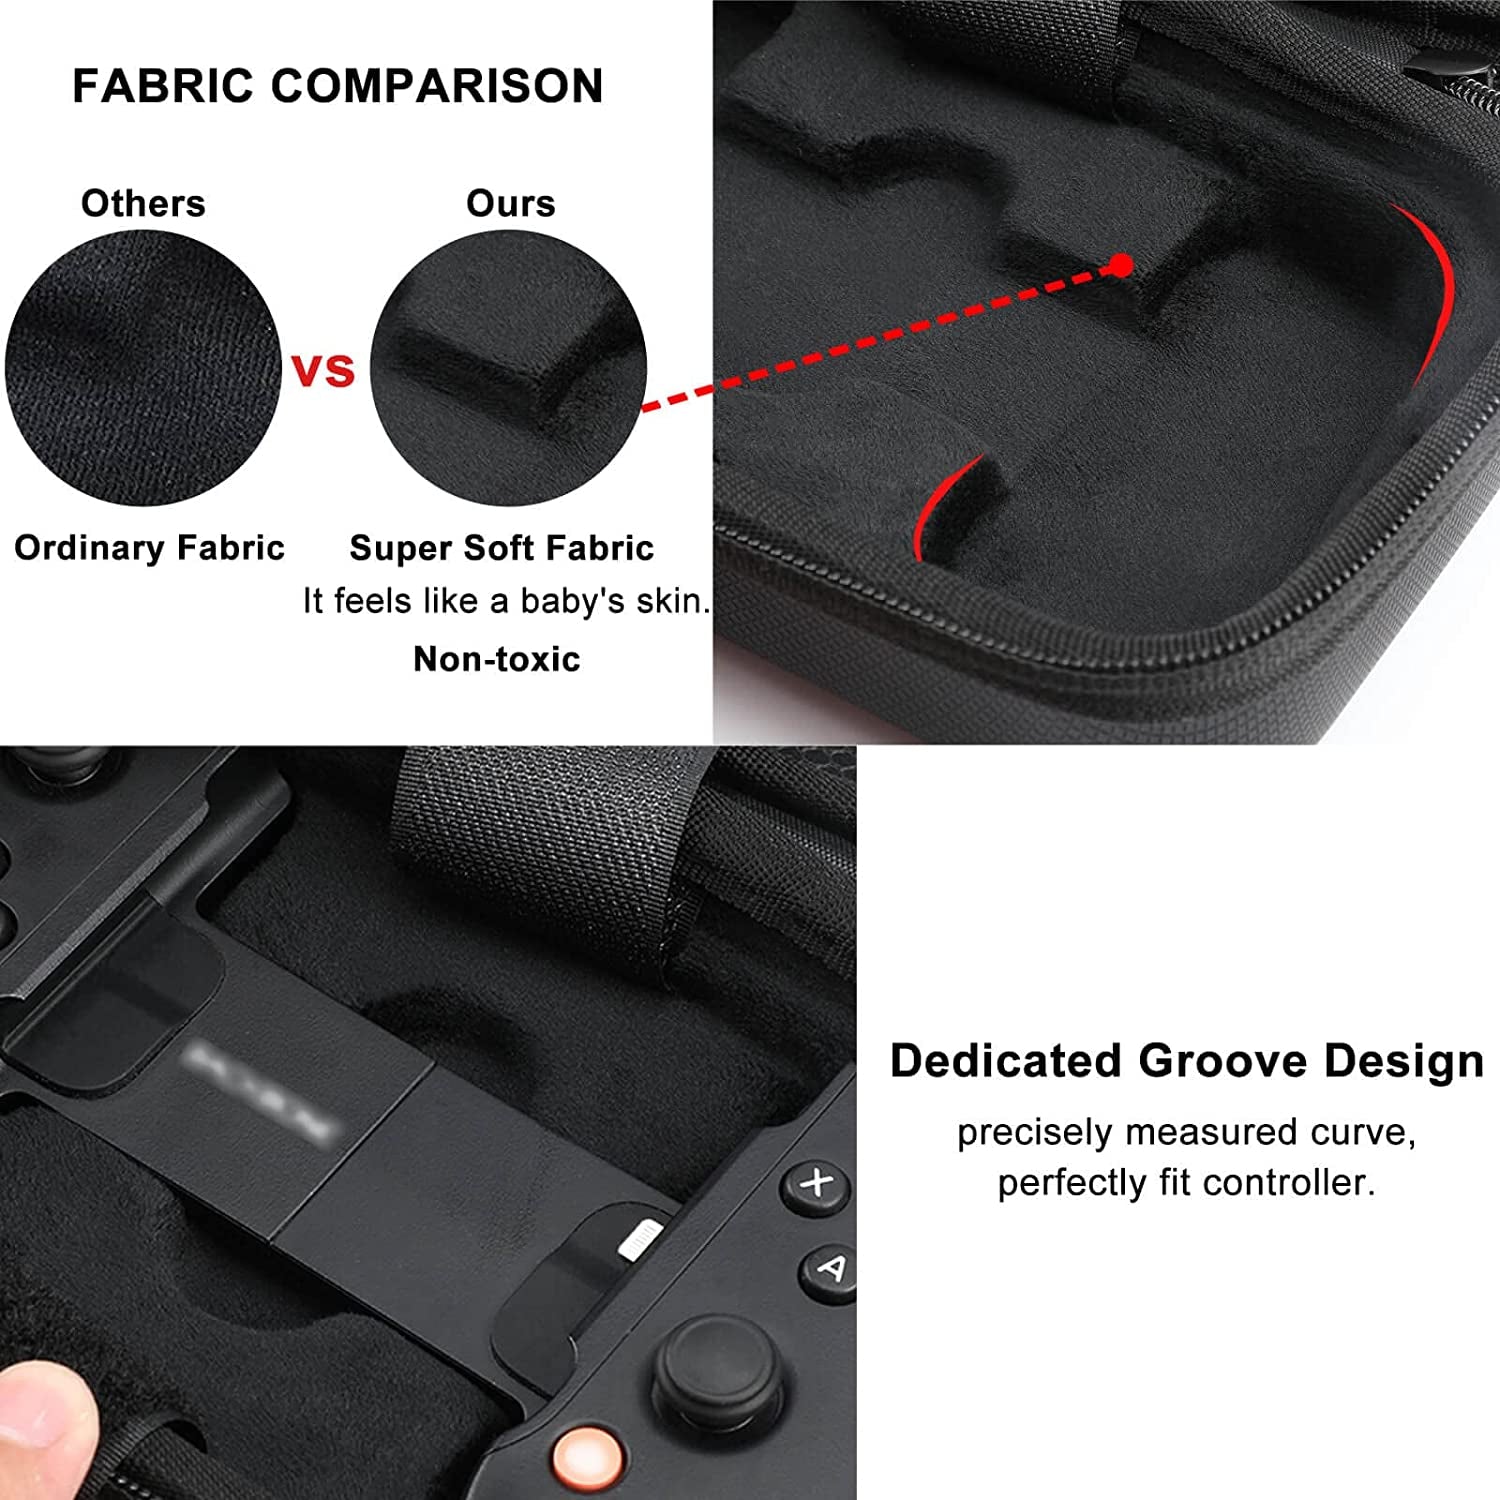 Case for Backbone One/Playstation Edition Mobile Controller,Portable Travel All Protective,Hard Messenger Carrying Bag, Strong Strap,Soft Lining,With Pockets for Accessories Black